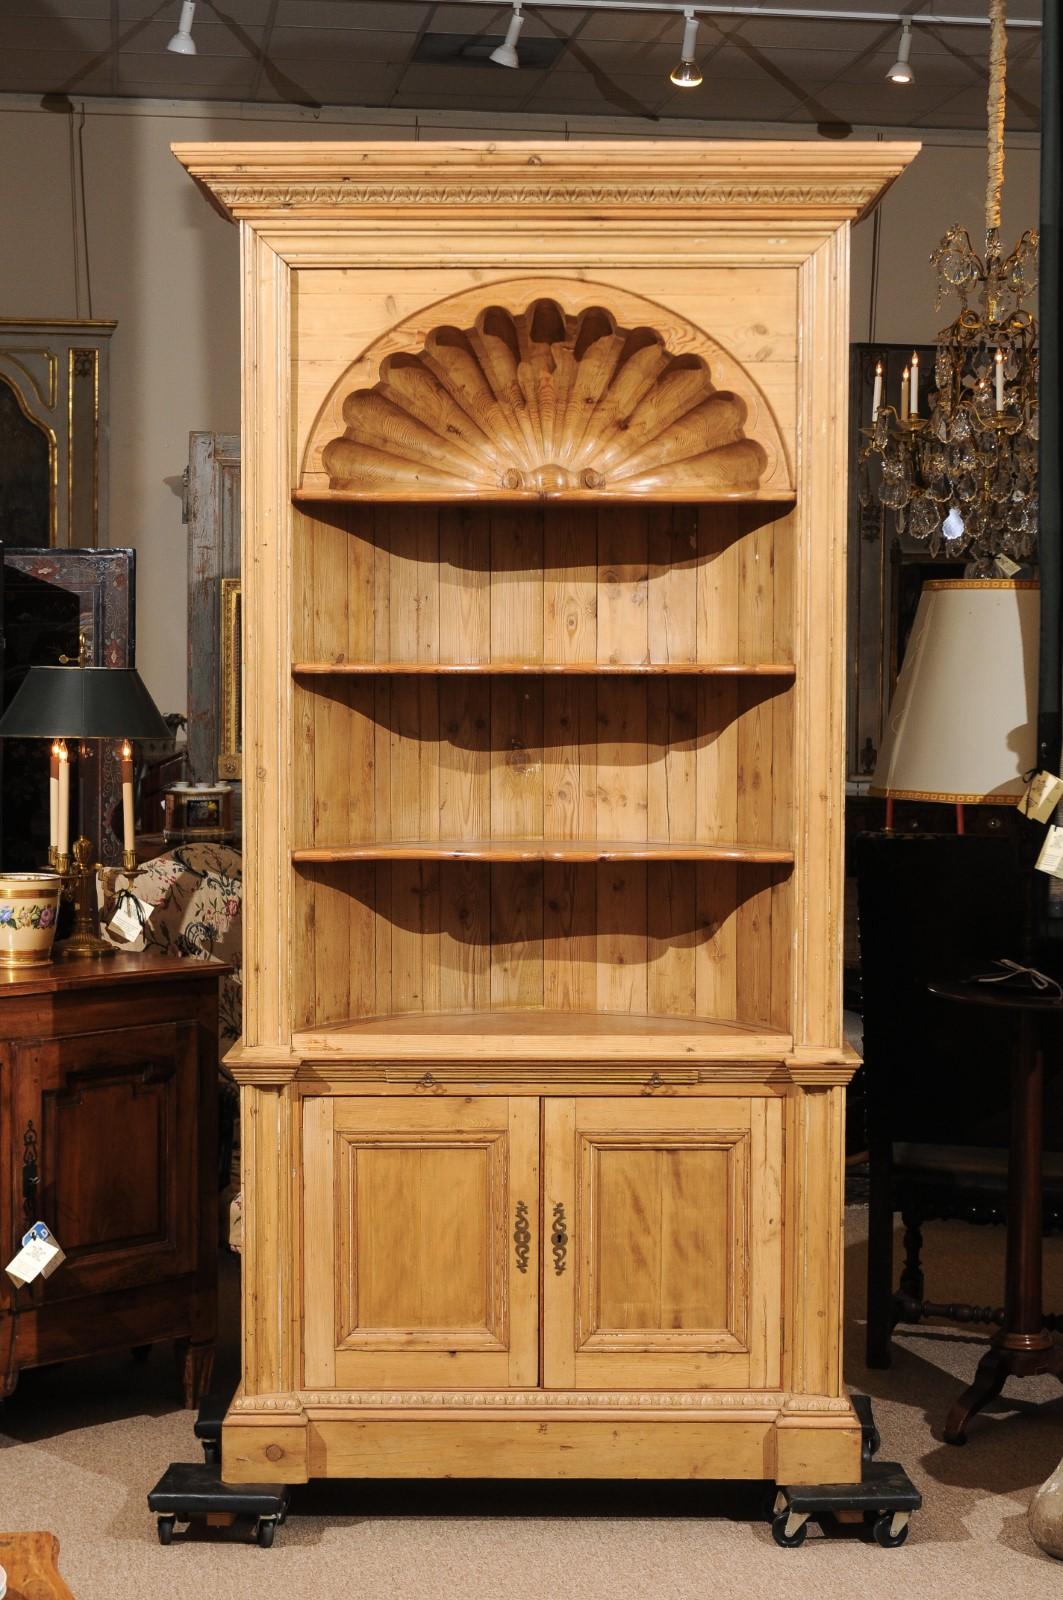 An English pine bookcase featuring shell carving 3 shelves and 2 paneled door cabinet below. The cabinet composed out of old pine elements.